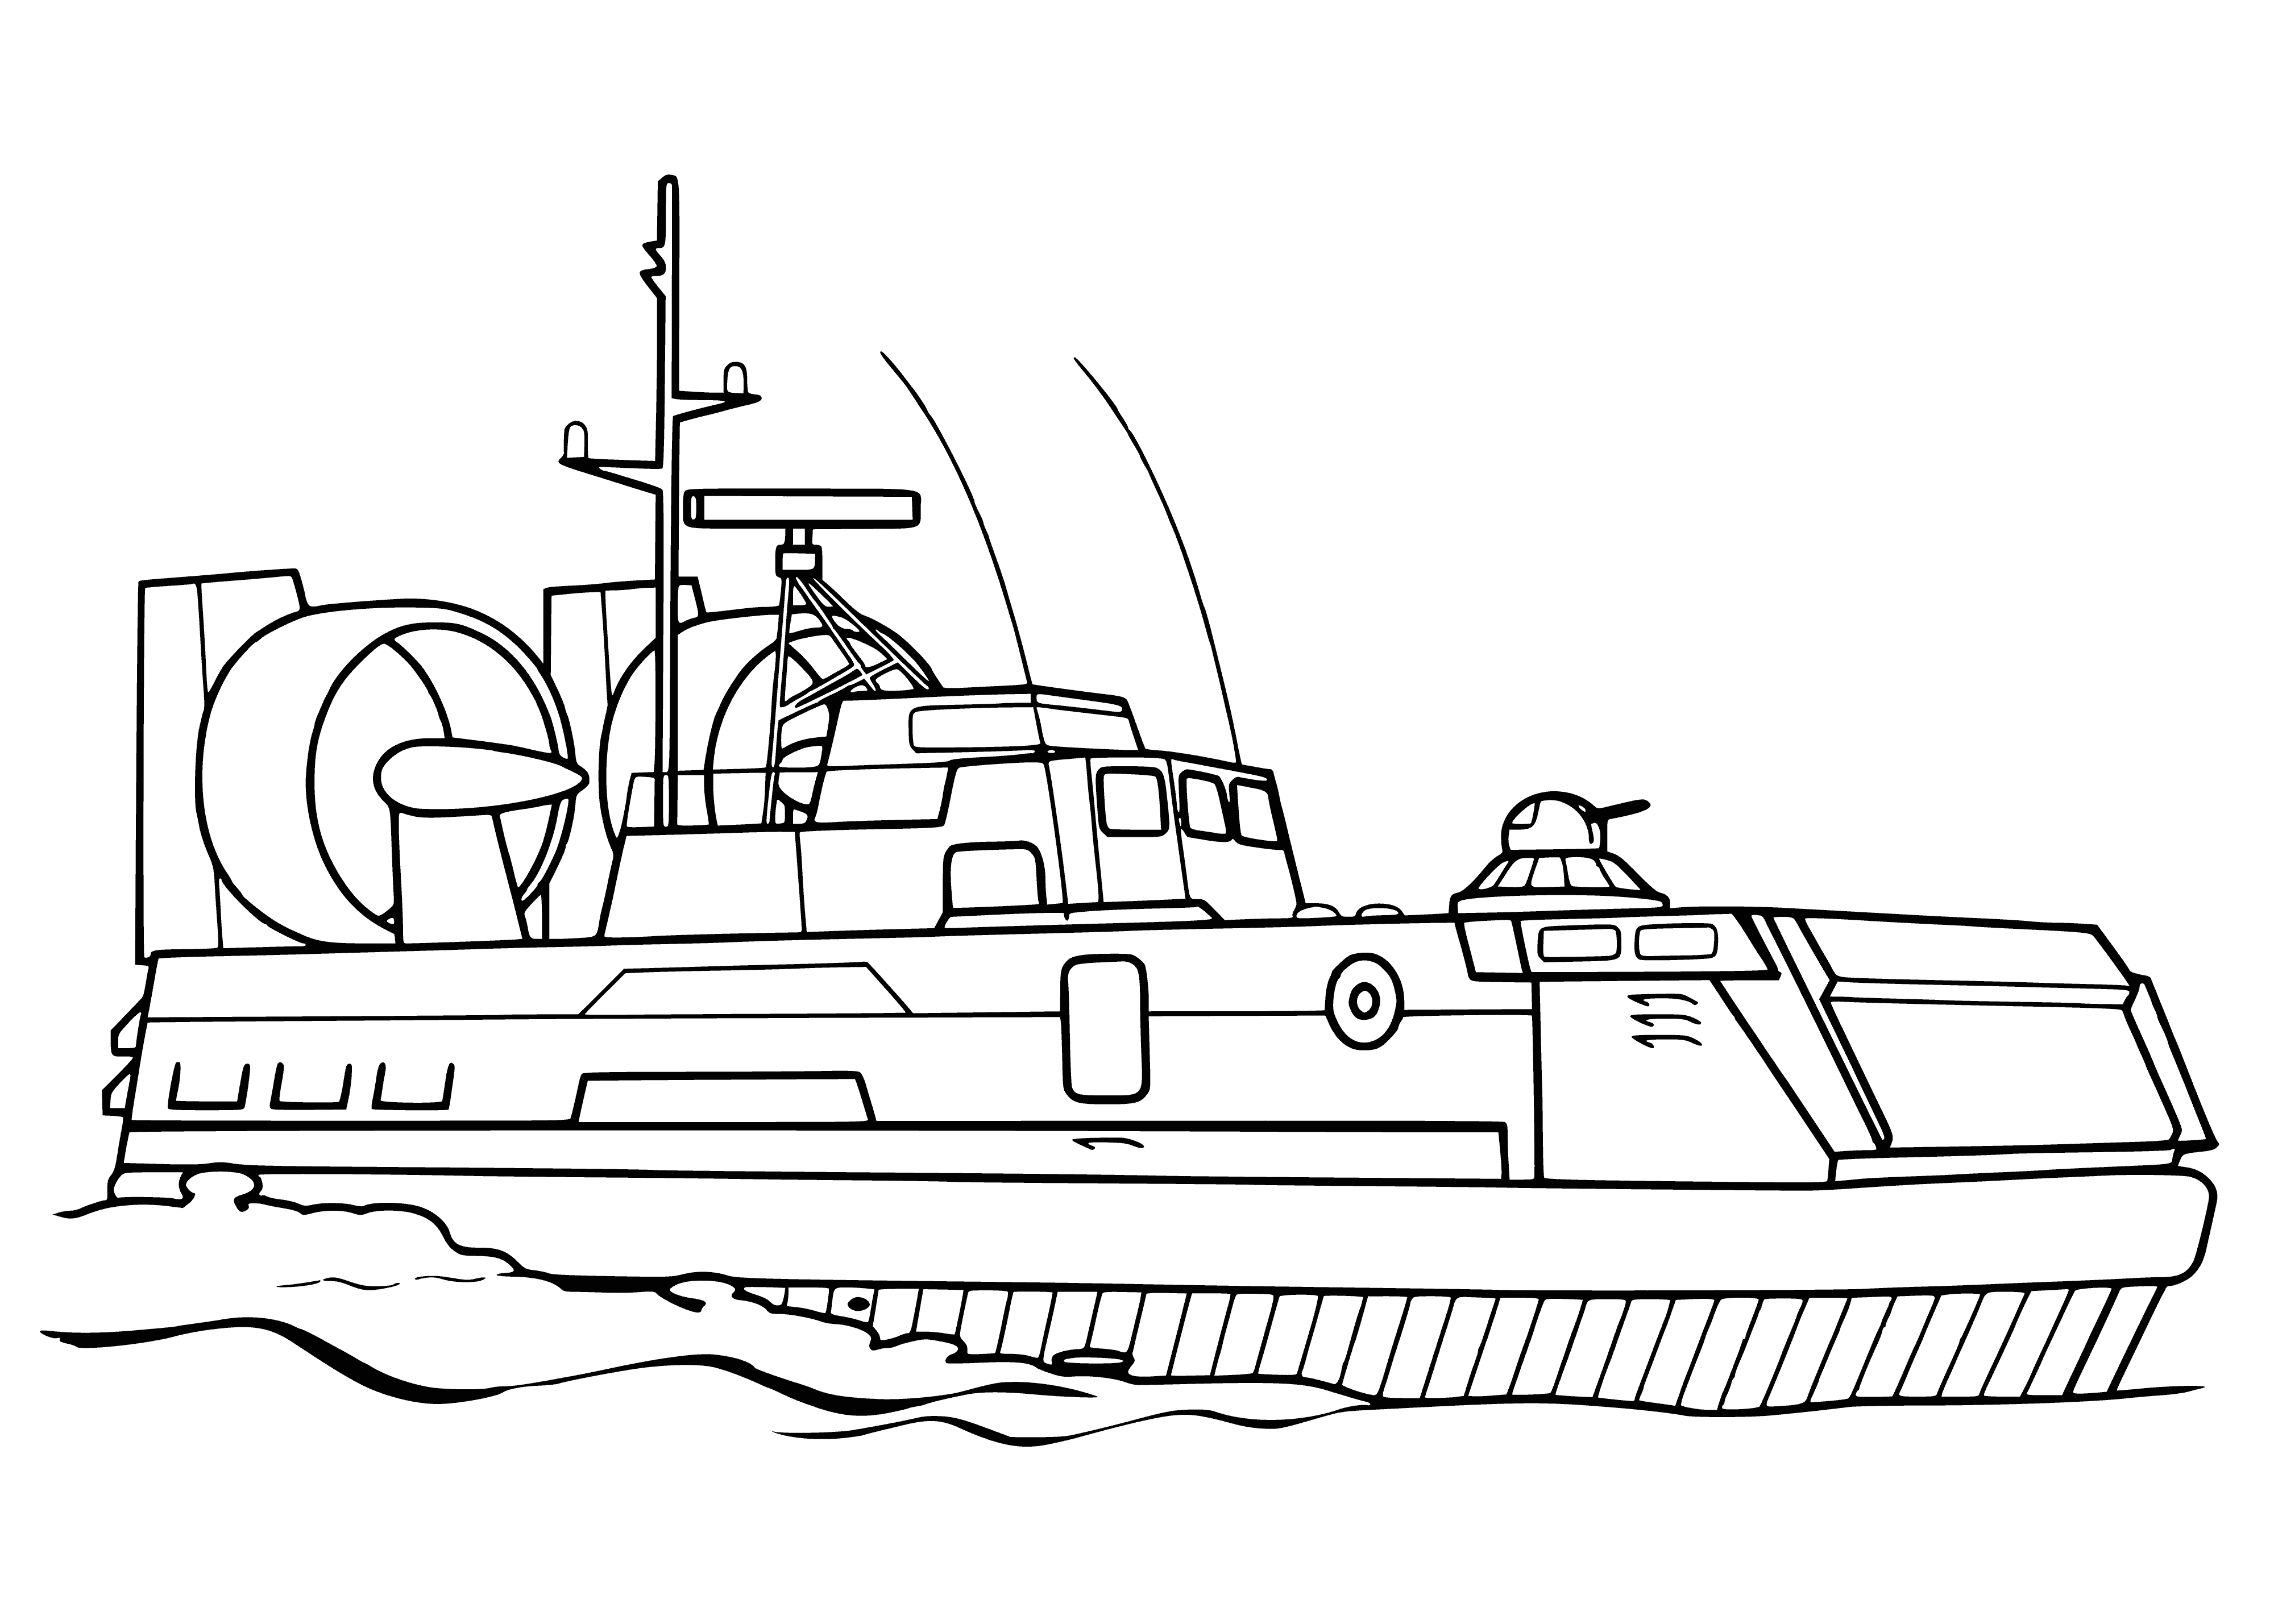 coloring page: Large military ship- long hull, tall superstructure, many decks, &large guns. Gray with flag flying from stern. #ships